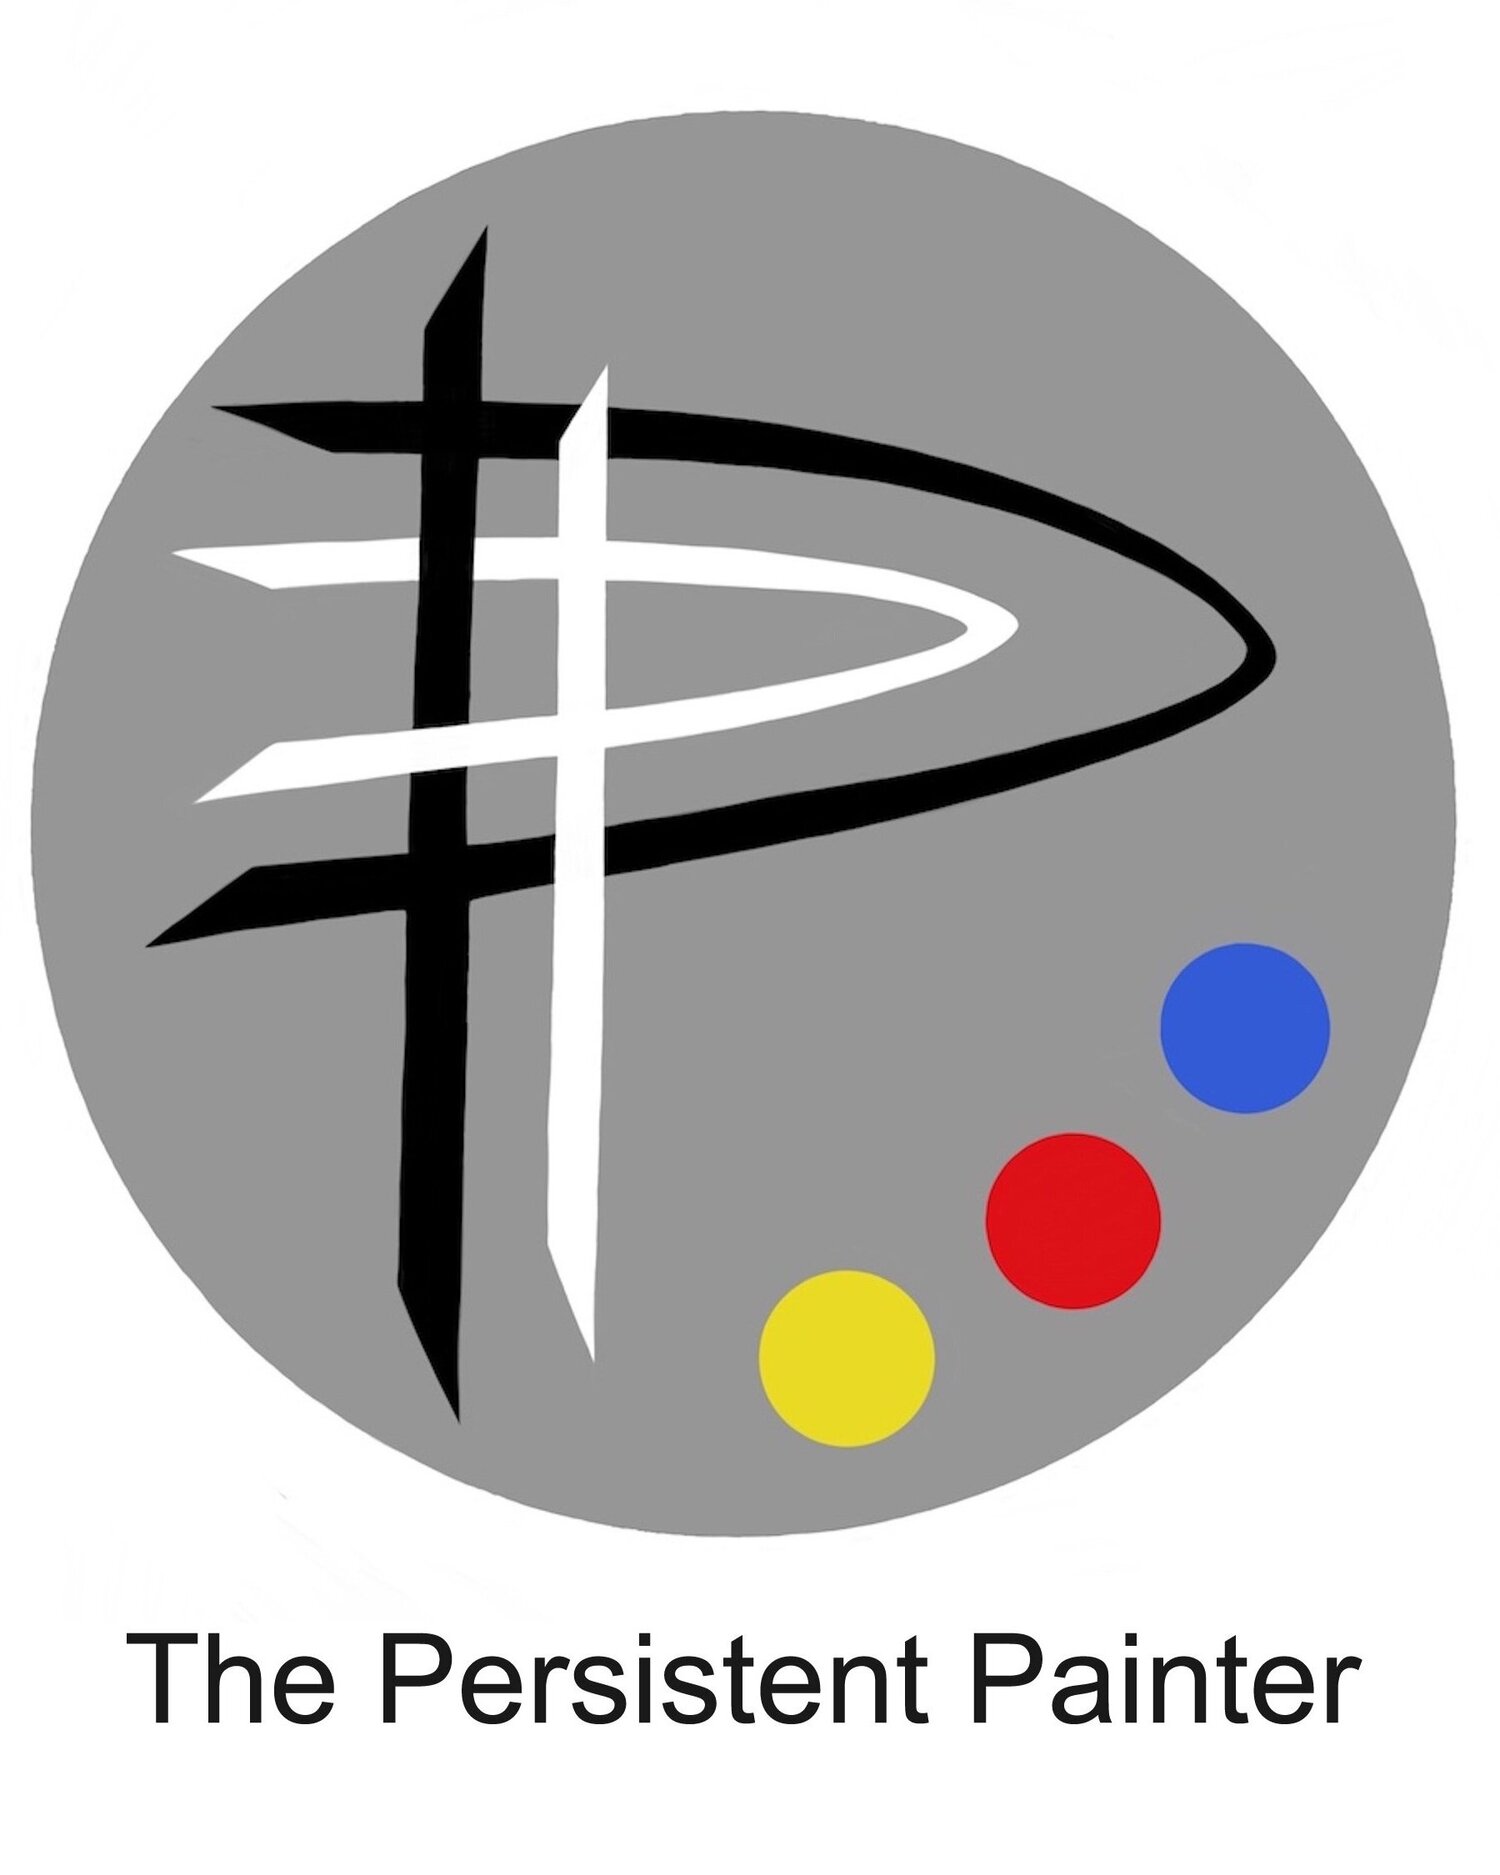 THE PERSISTENT PAINTER